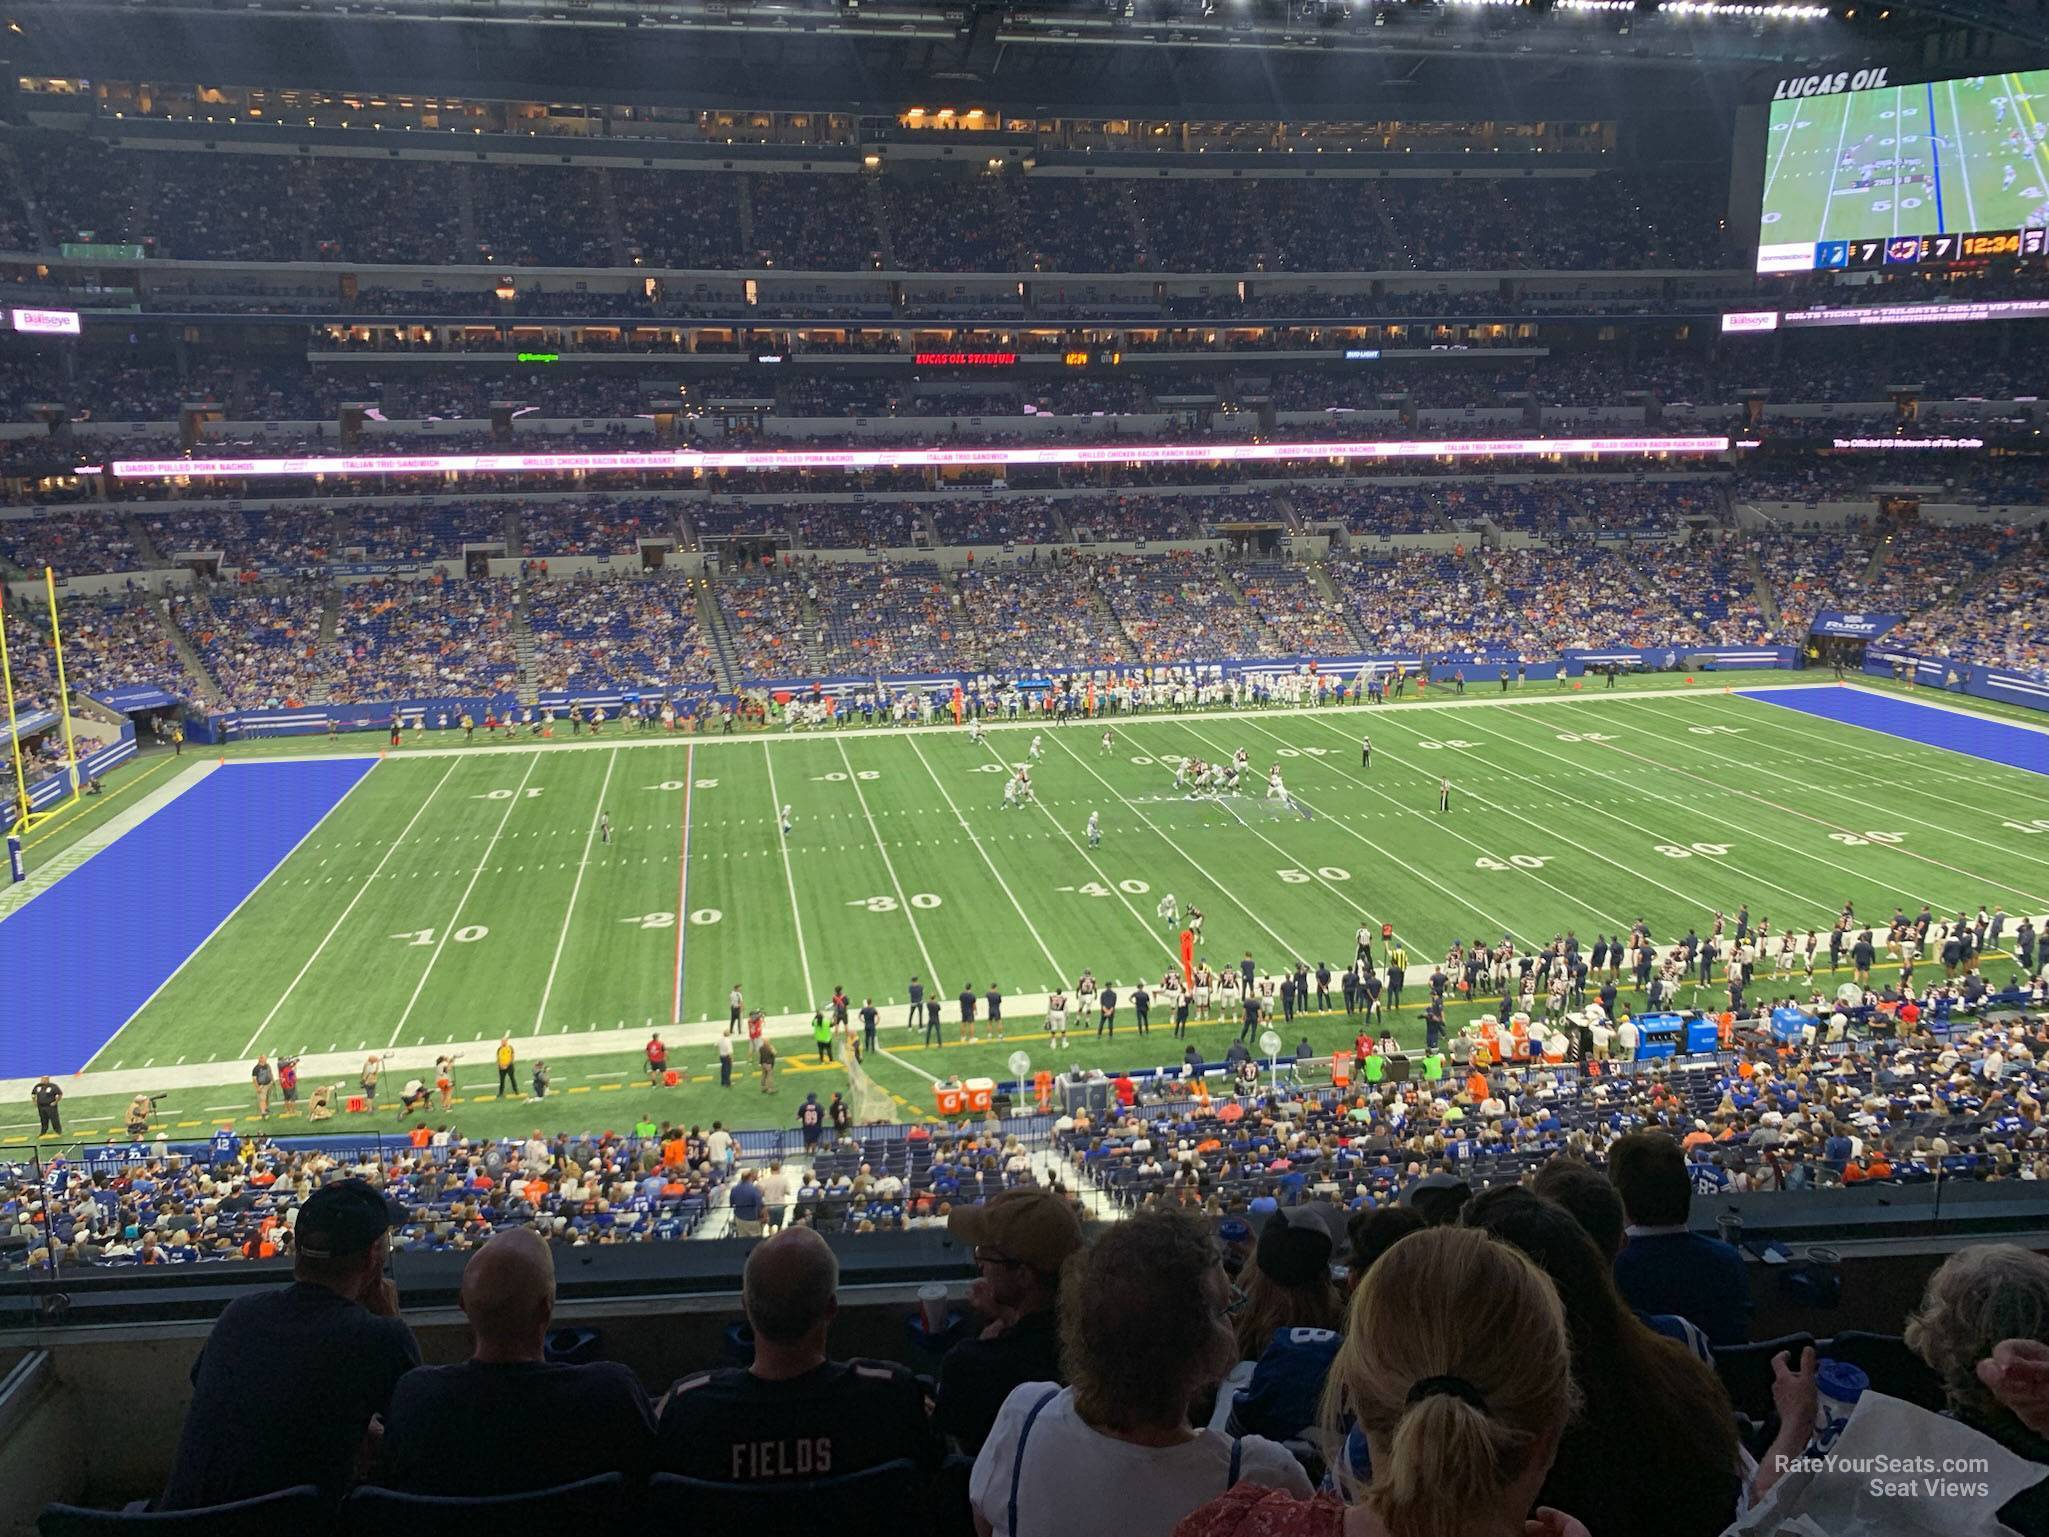 section 315, row 4n seat view  for football - lucas oil stadium